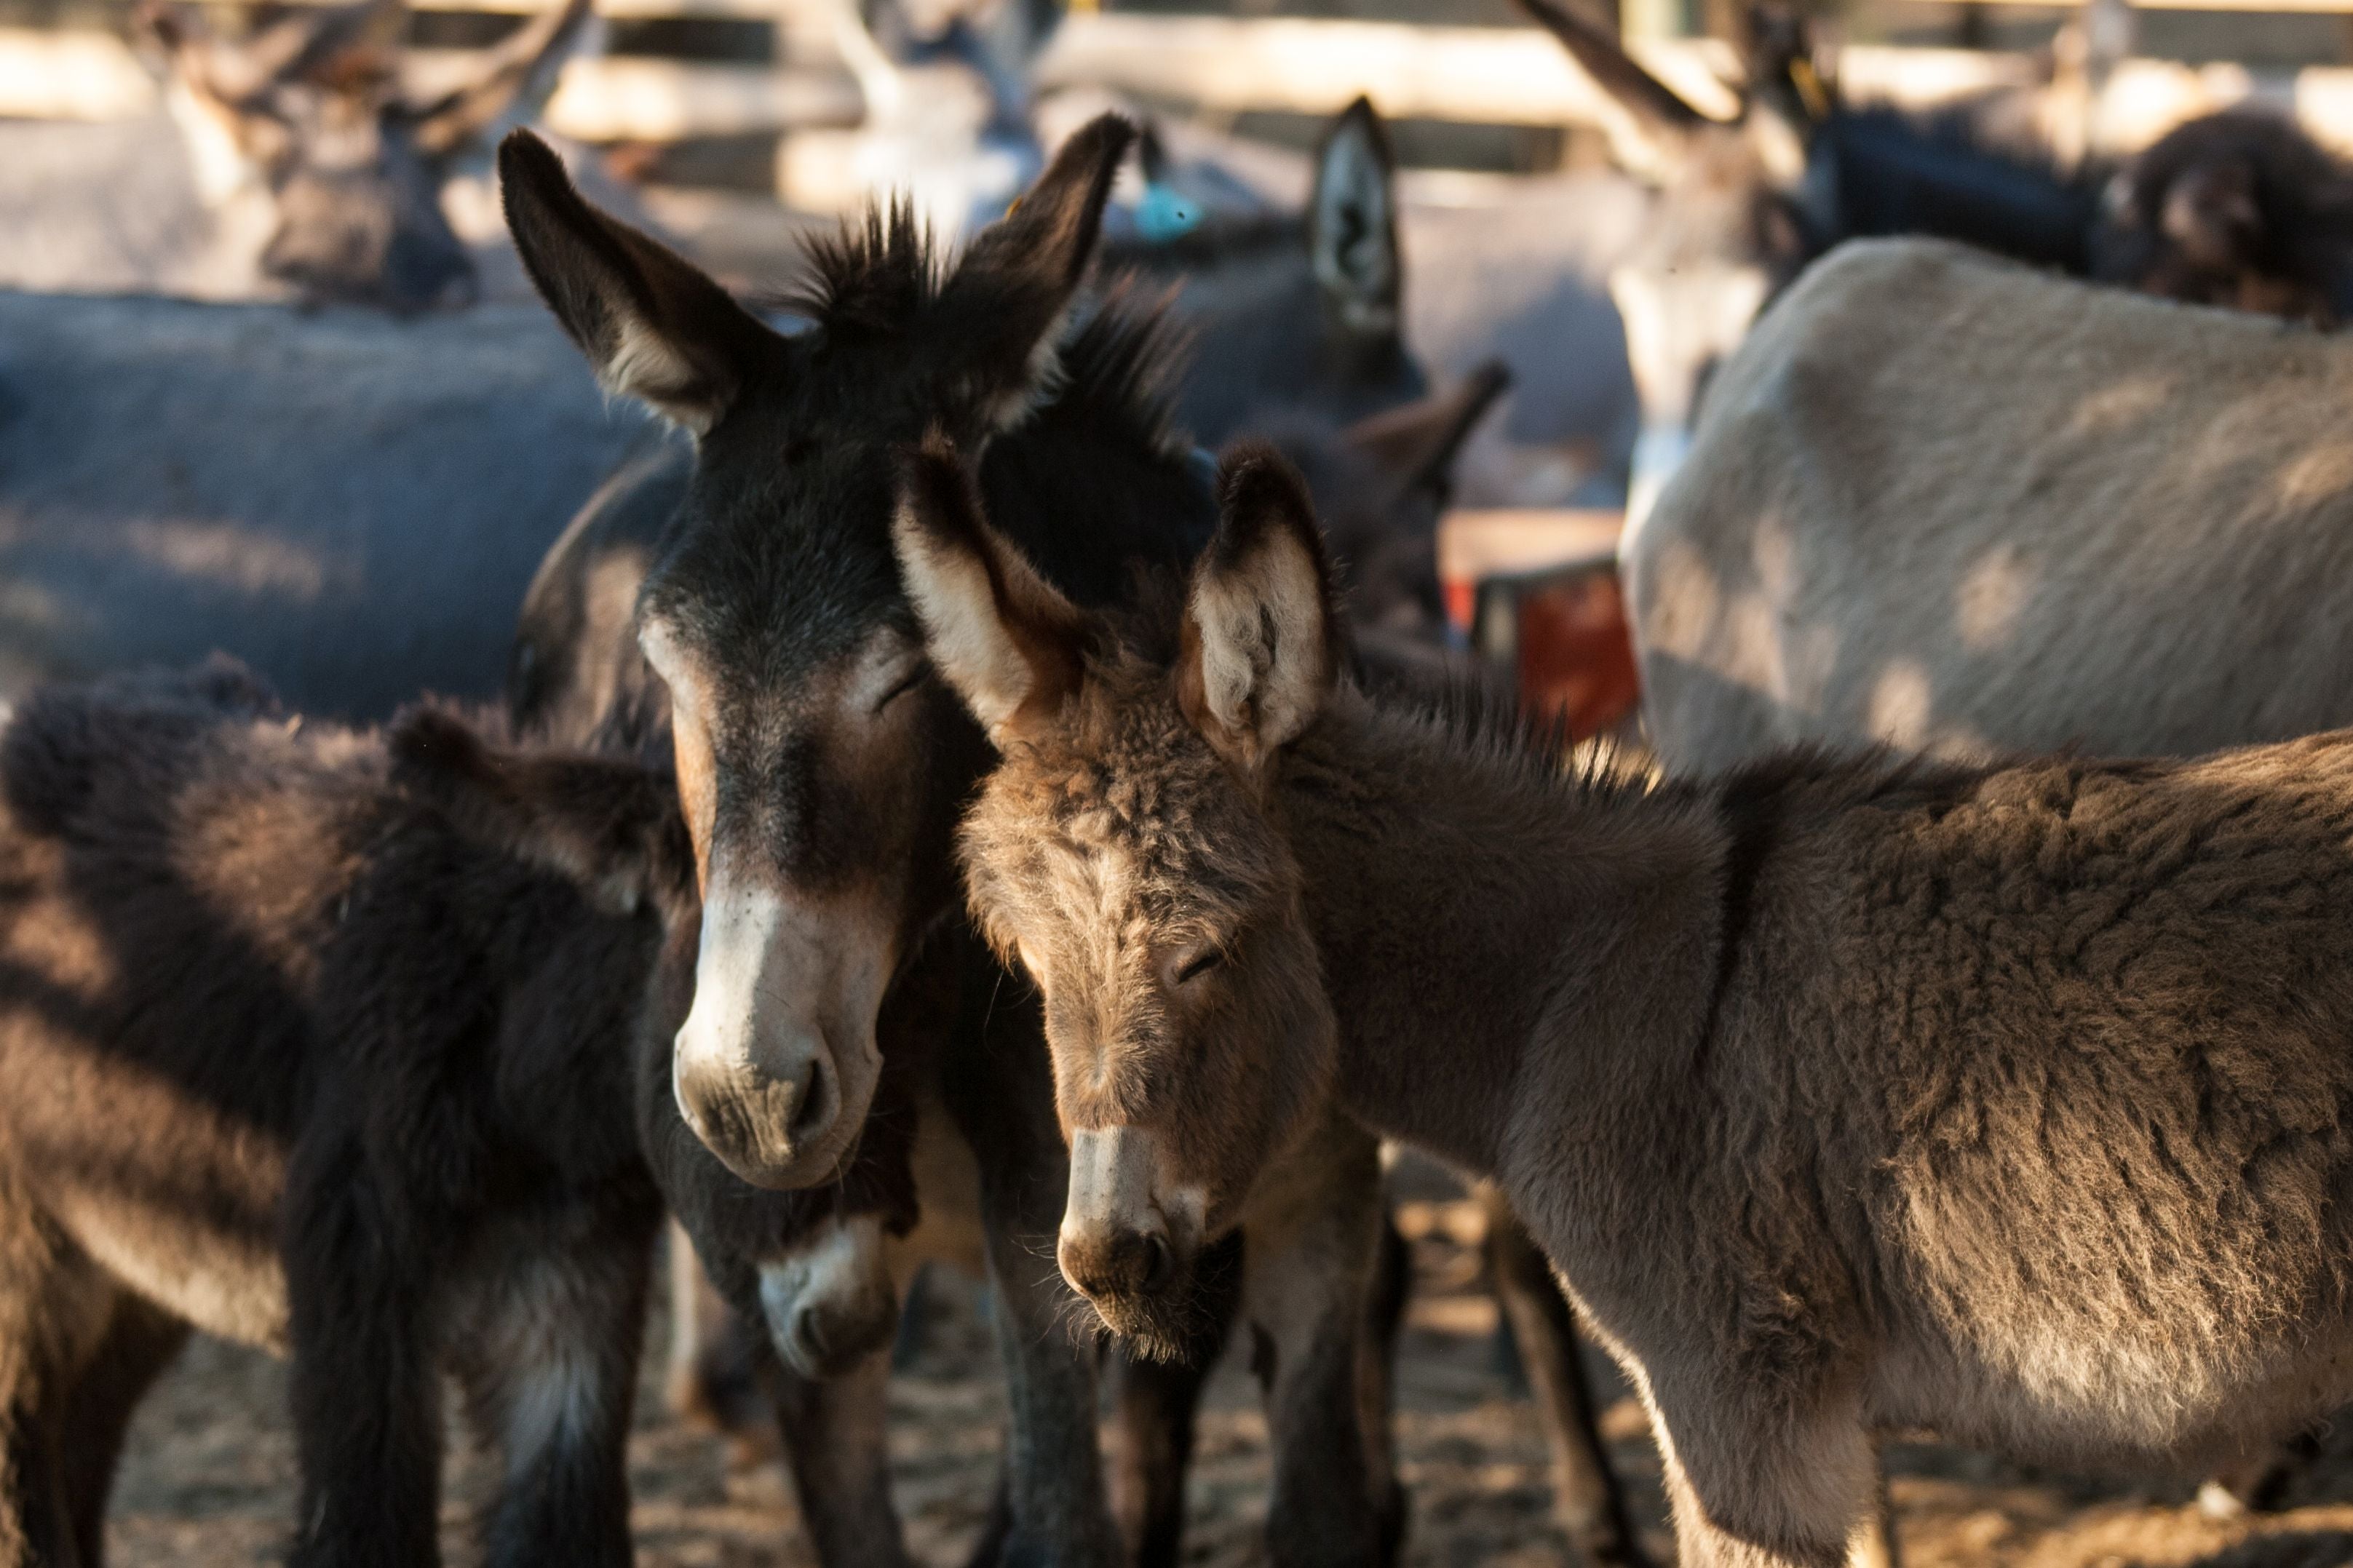 ‘At the current rate of decline, donkeys would disappear completely from large parts of the world in under a decade’